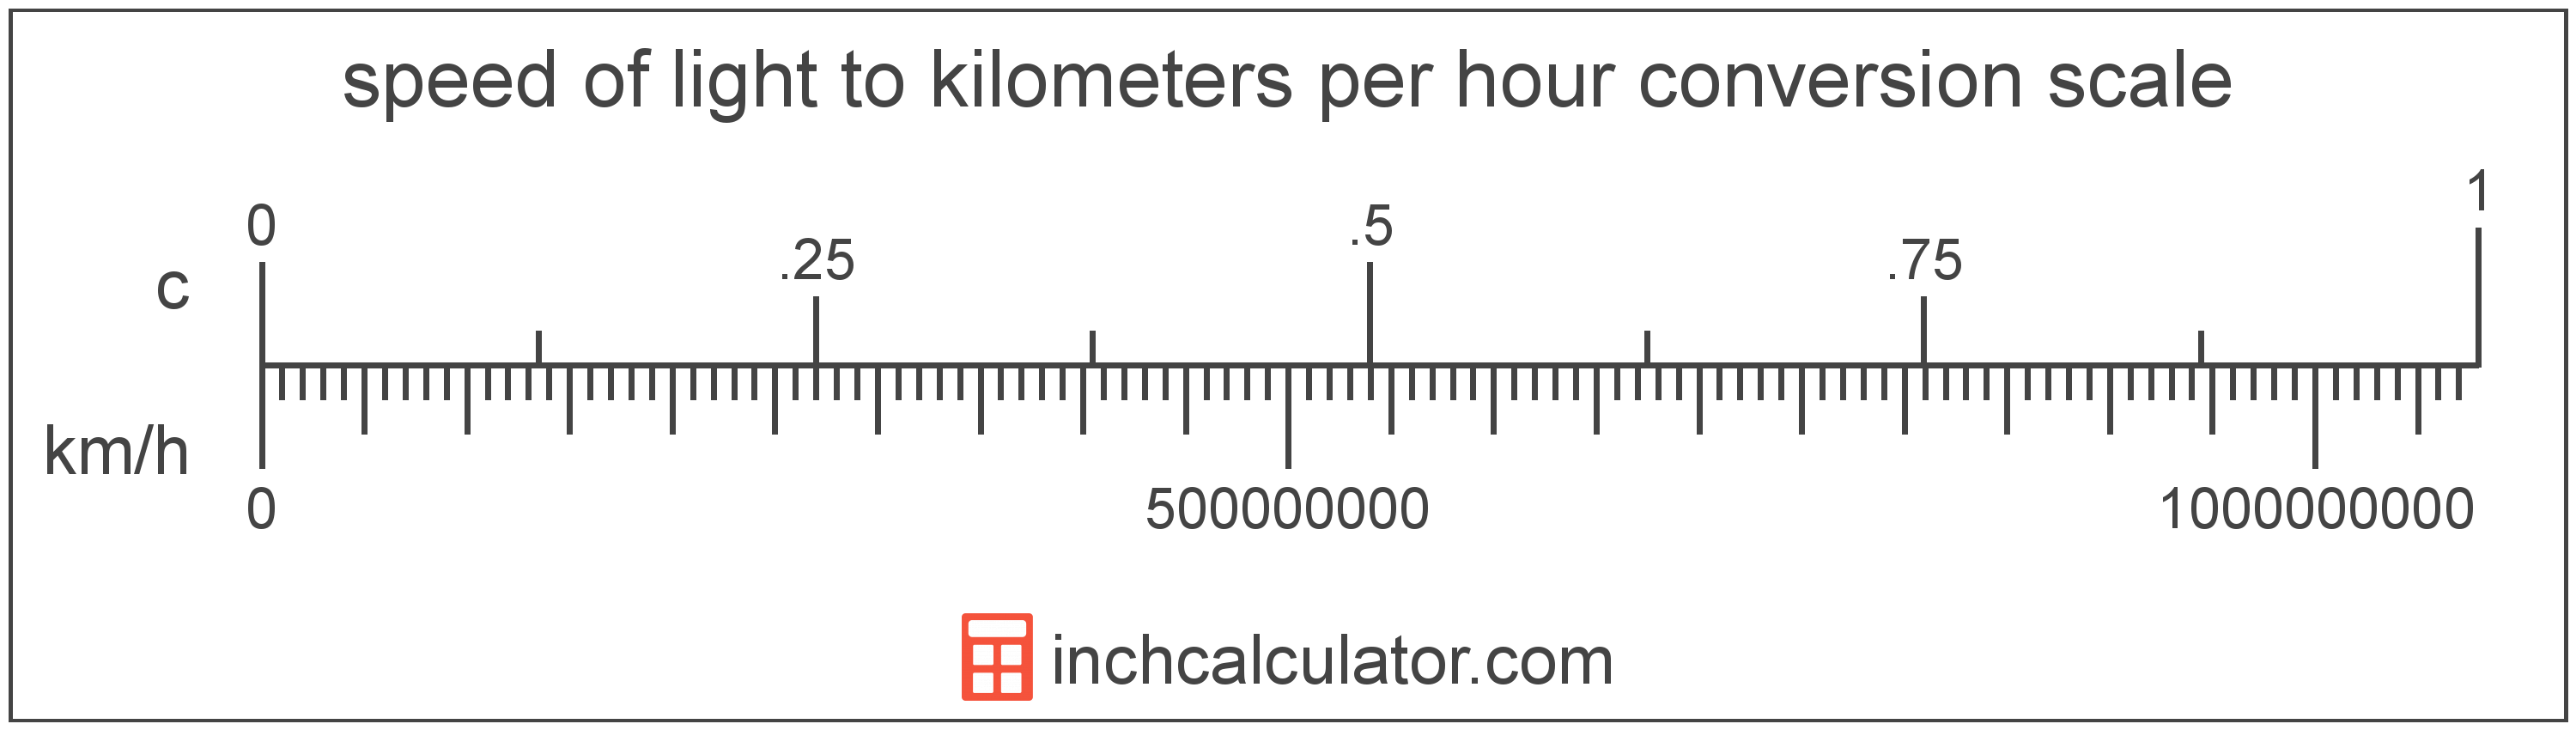 conversion scale showing kilometers per hour and equivalent speed of light speed values